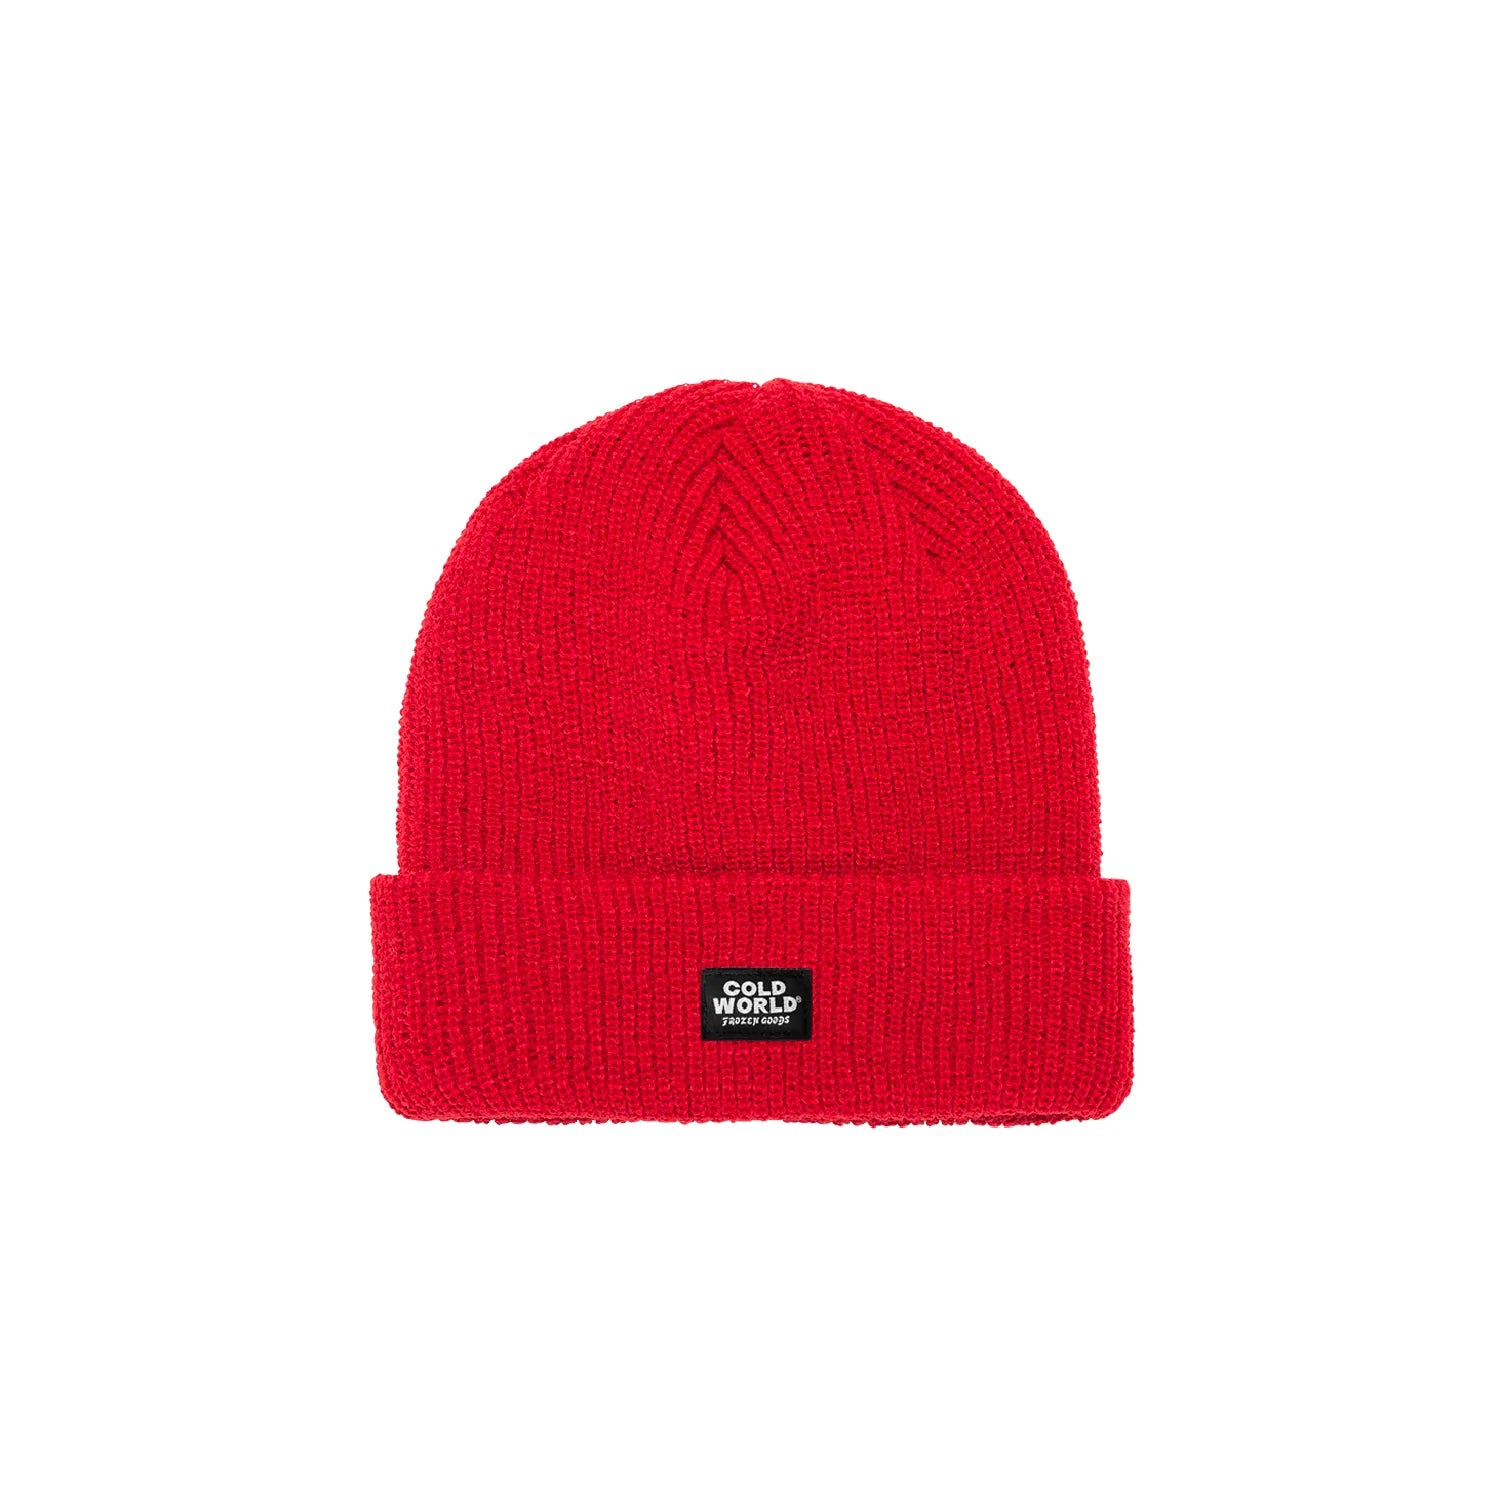 Cold World Frozen Goods Woven Label Beanie 'Red'